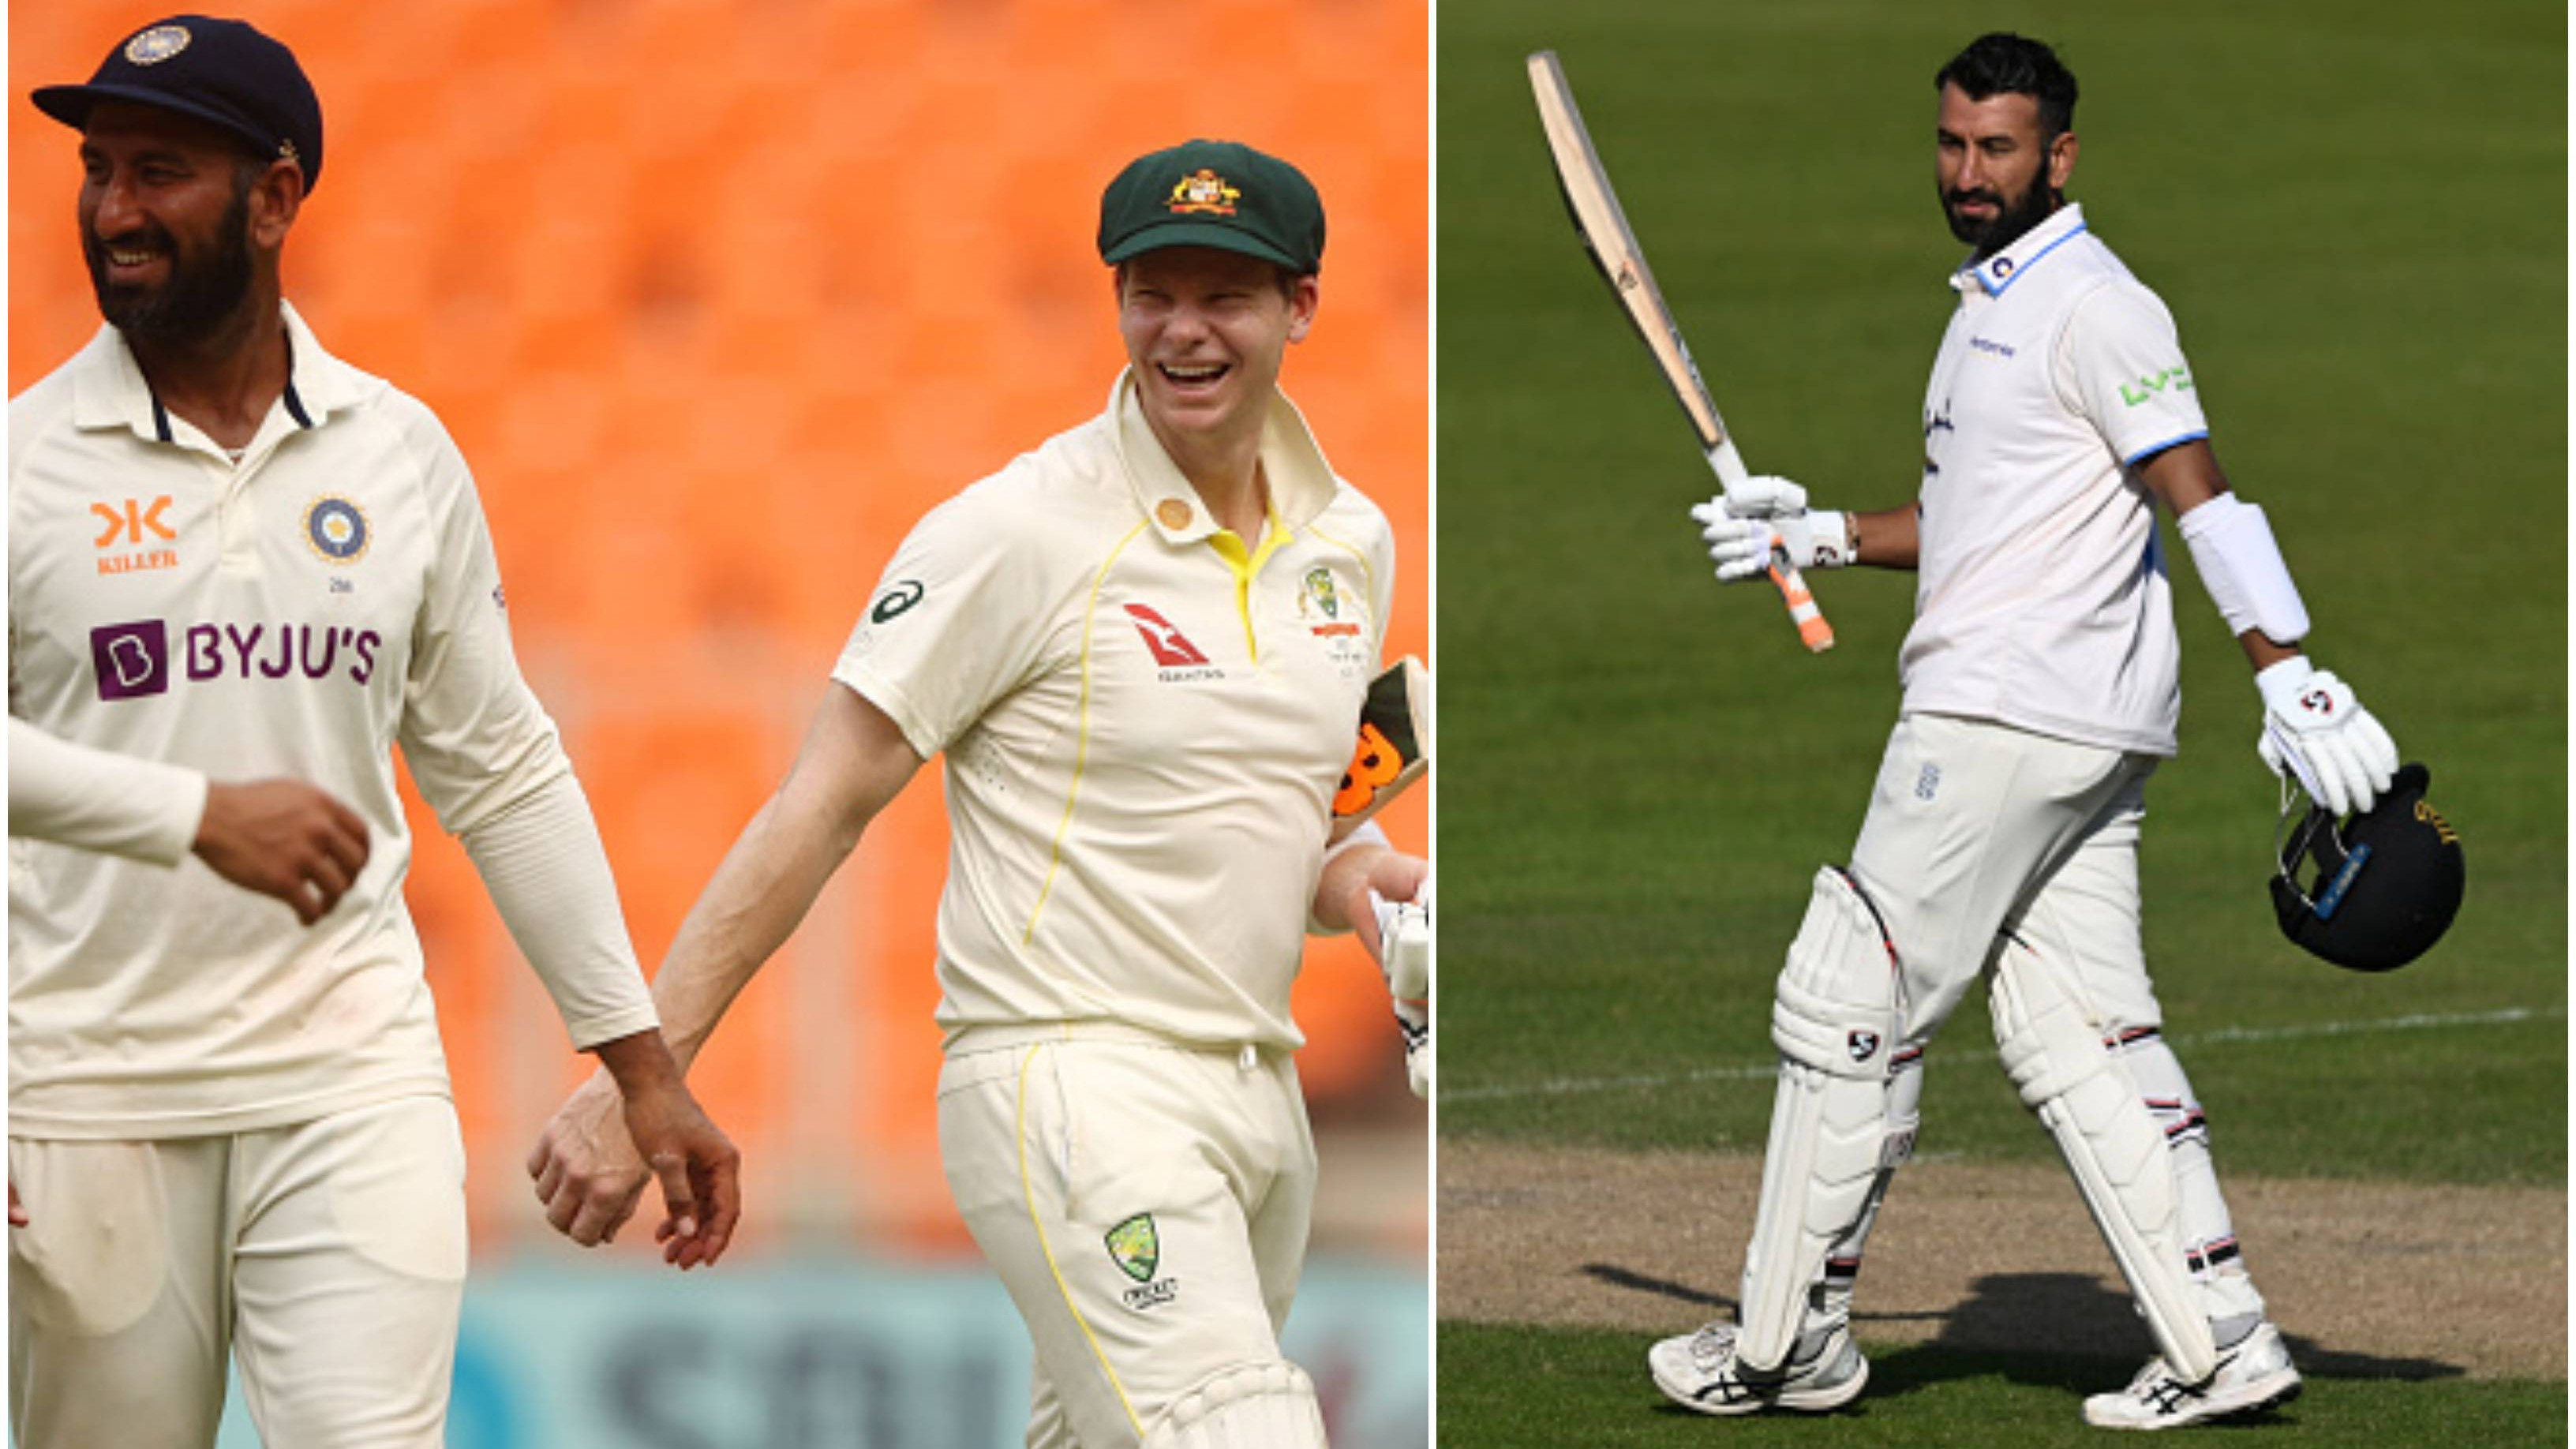 “It will be mixed feelings,” Pujara on playing alongside Smith for Sussex ahead of WTC final